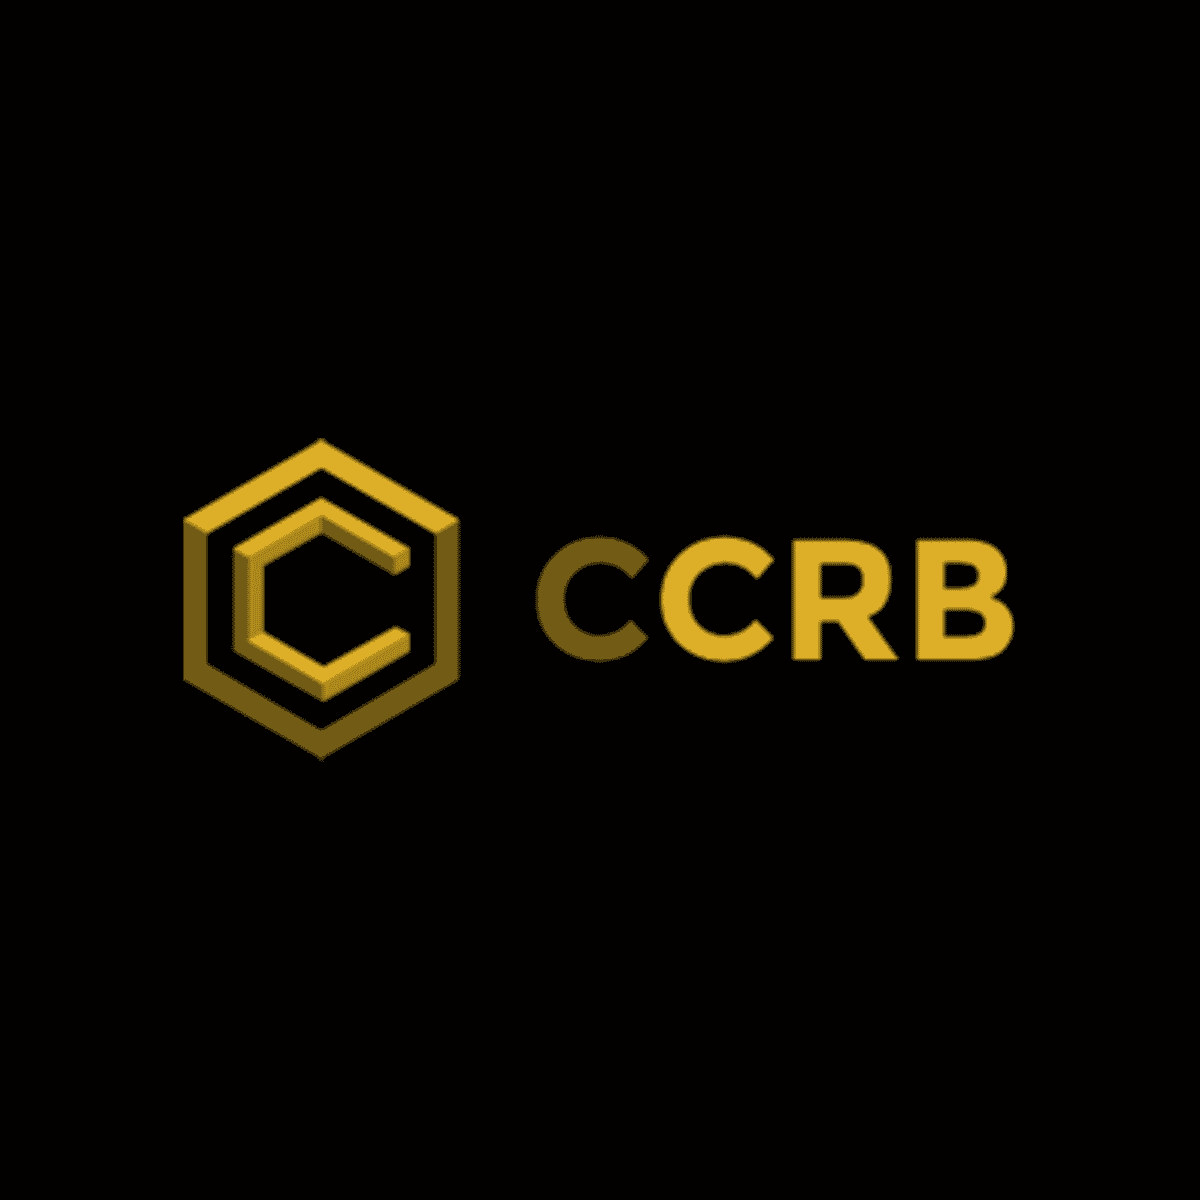 ccrb coin